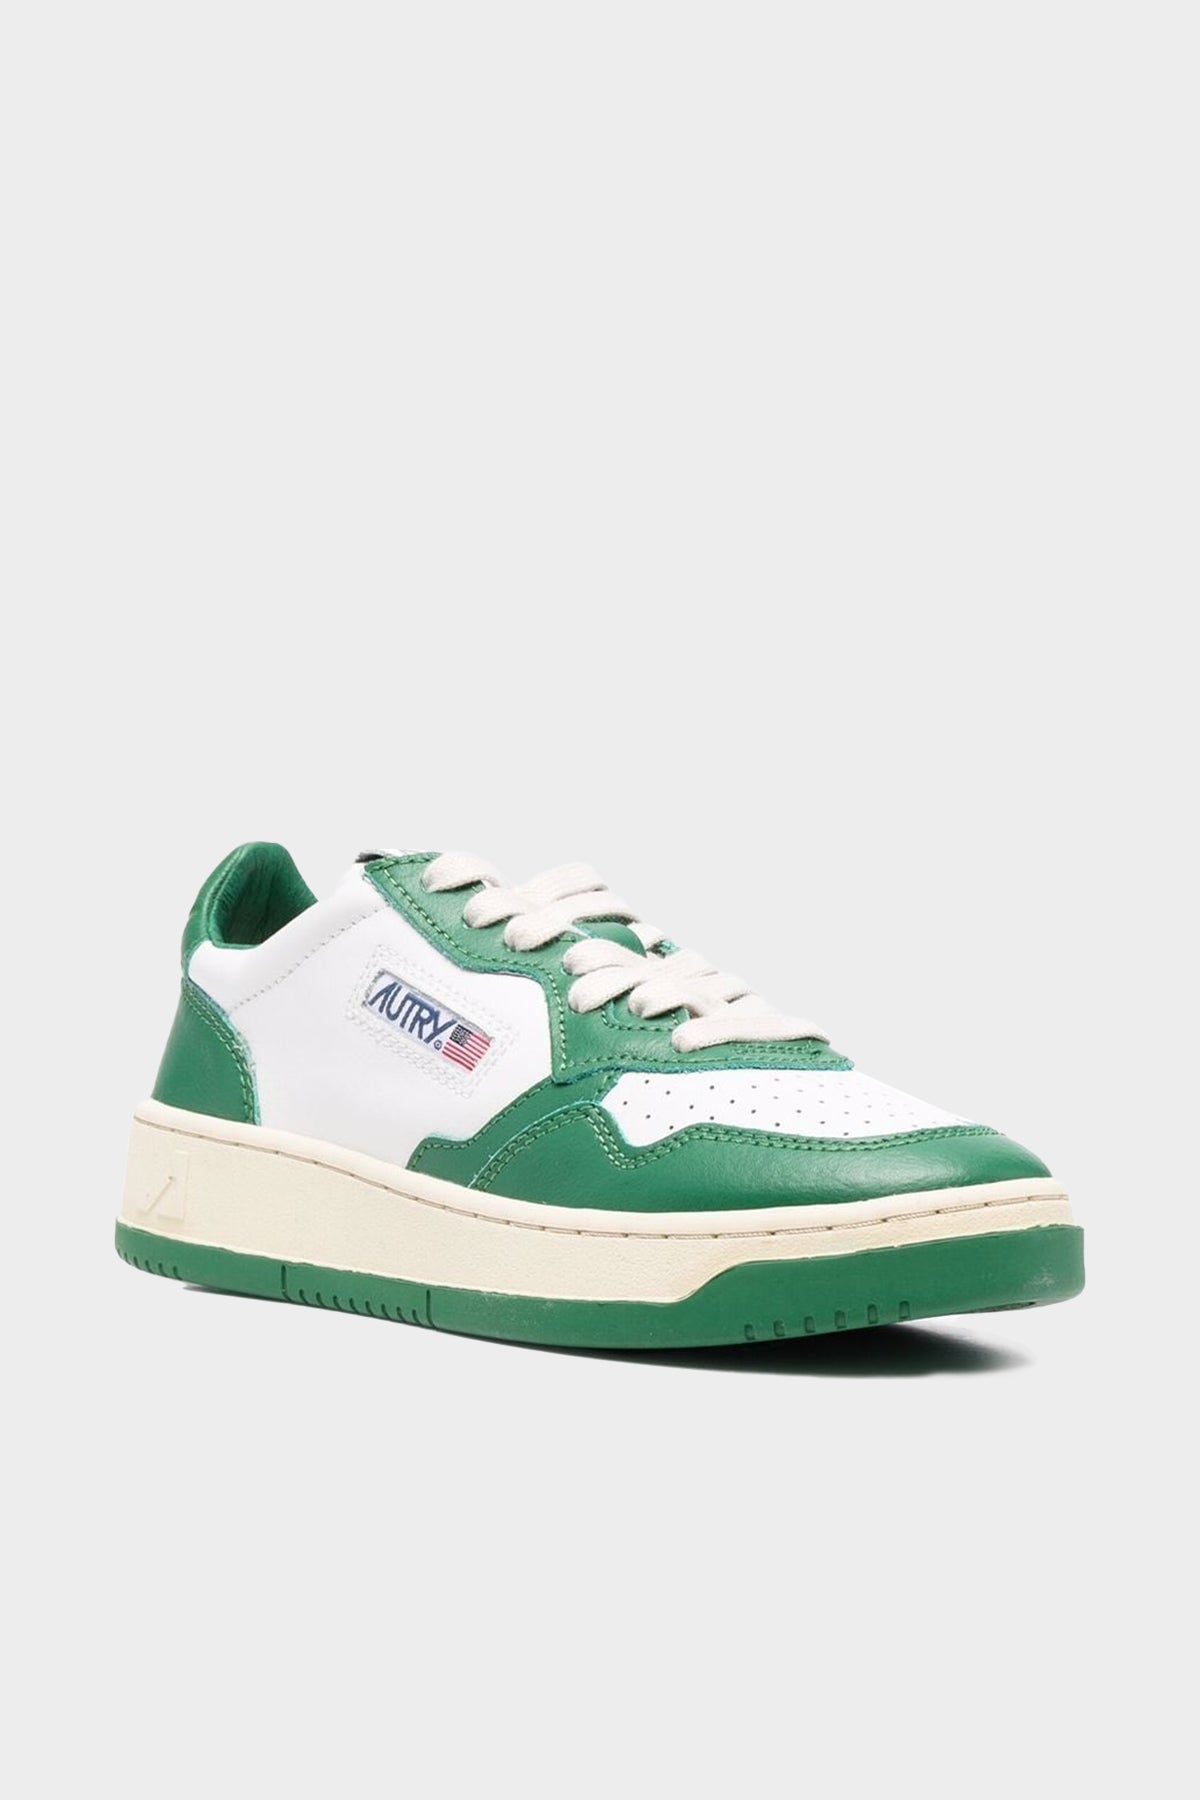 Two-Tone Medalist Low Leather Sneaker in White and Green - shop-olivia.com